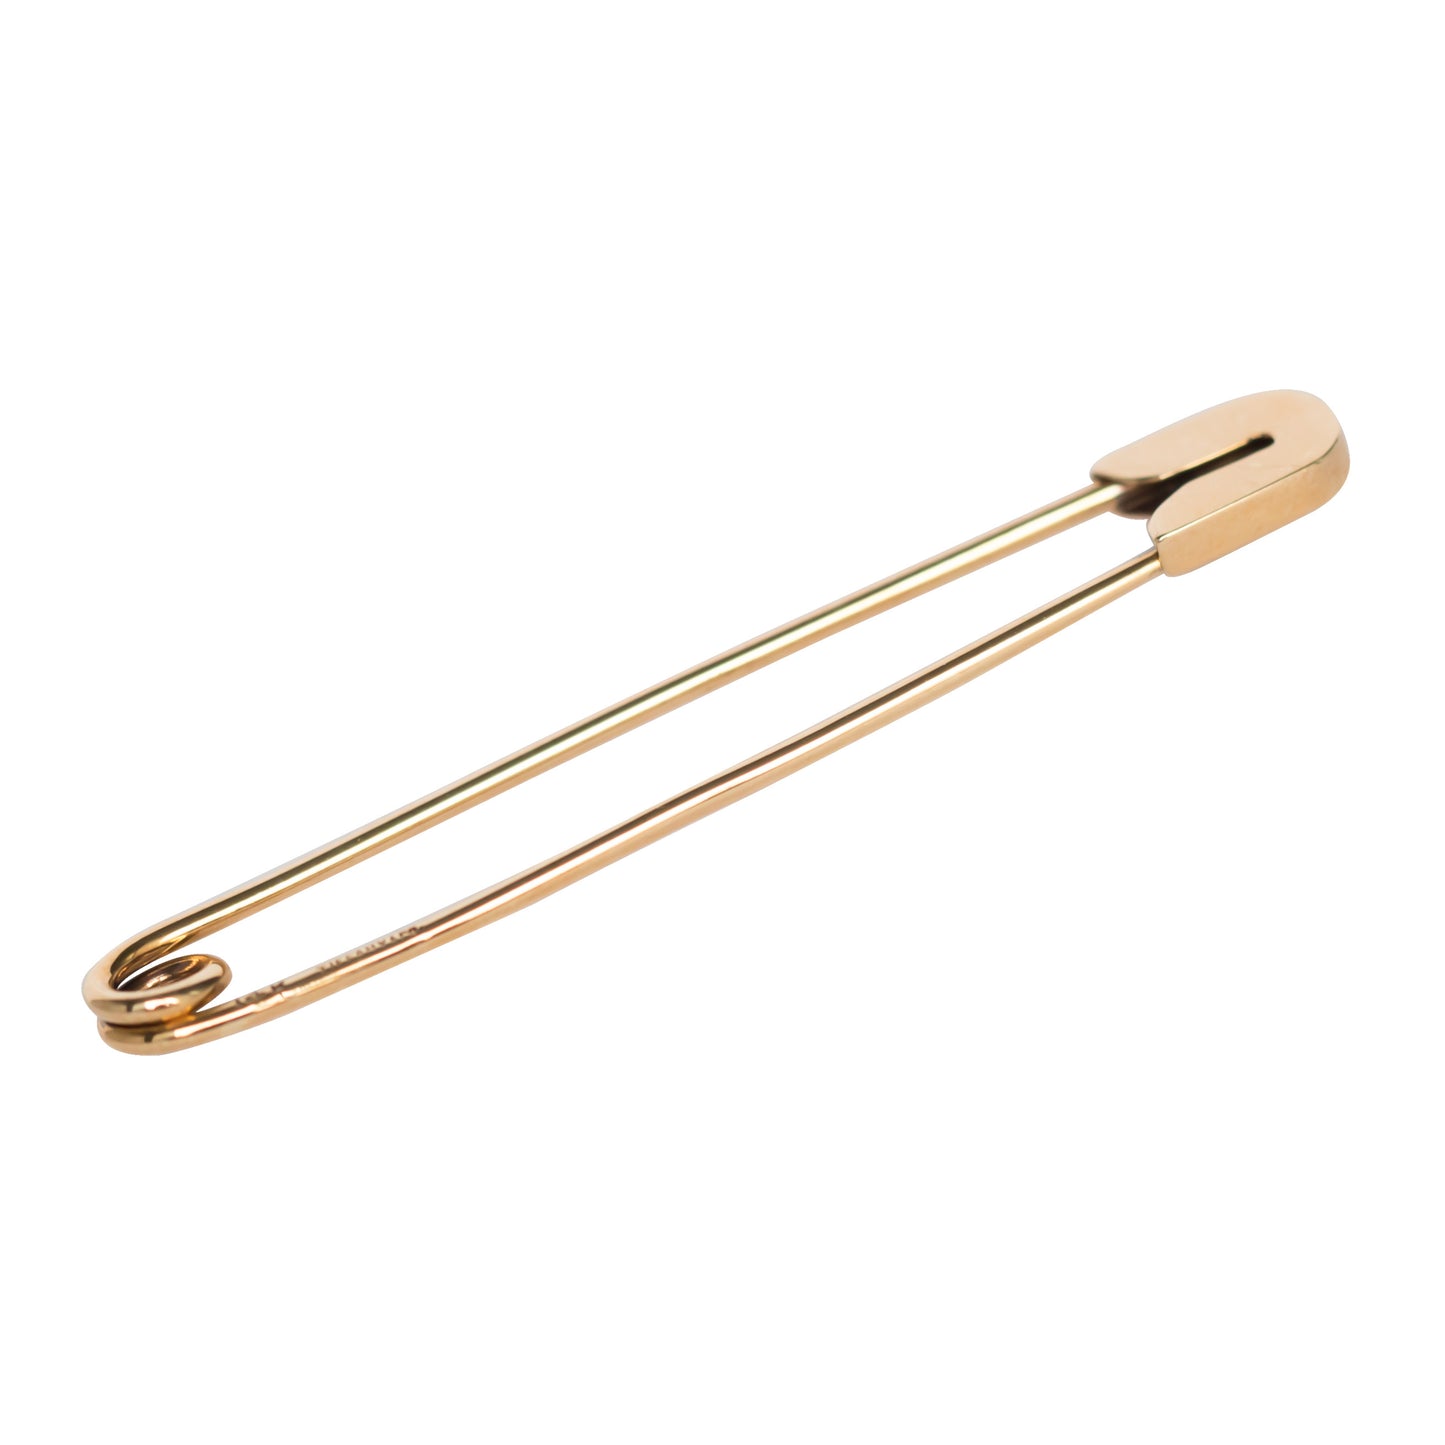 Tiffany & co. Yellow Gold Safety Baby Pin